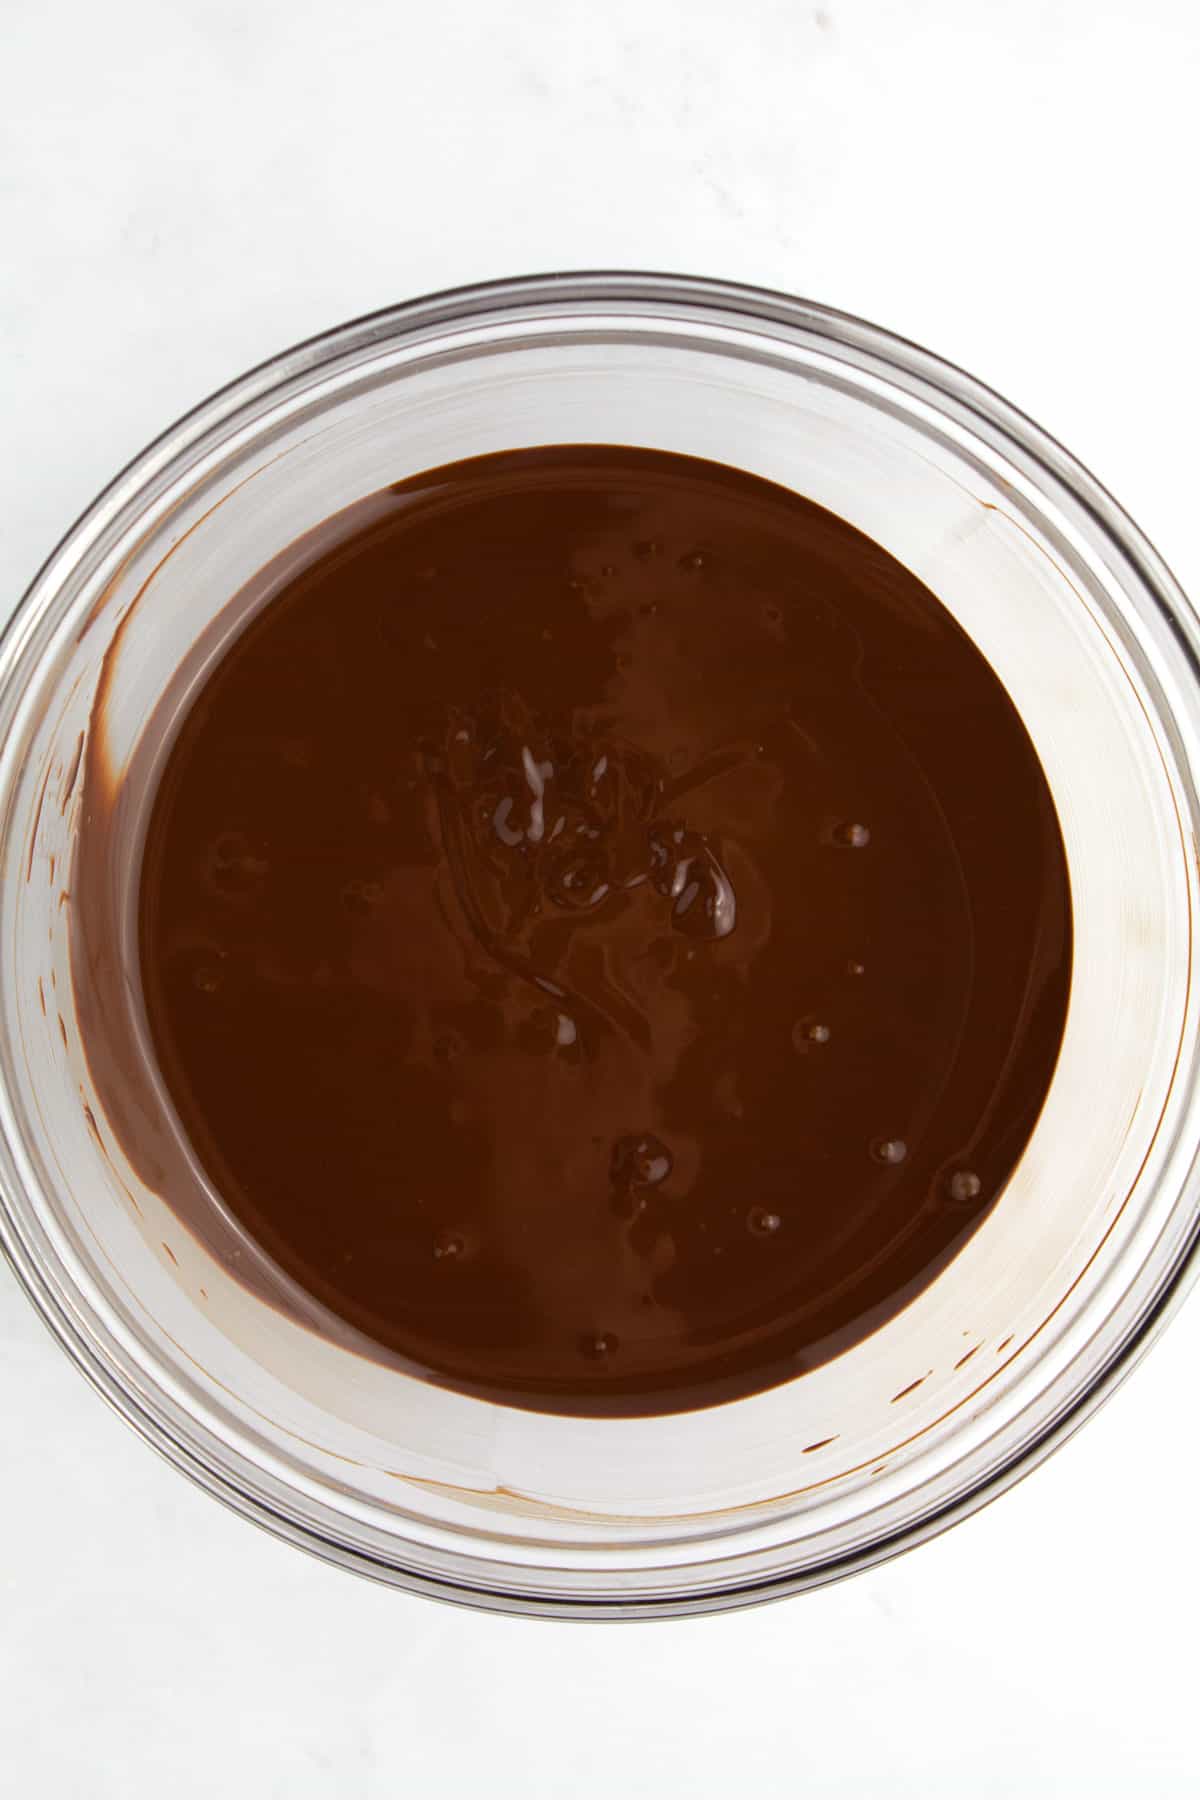 Melted chocolate in a clear glass bowl.